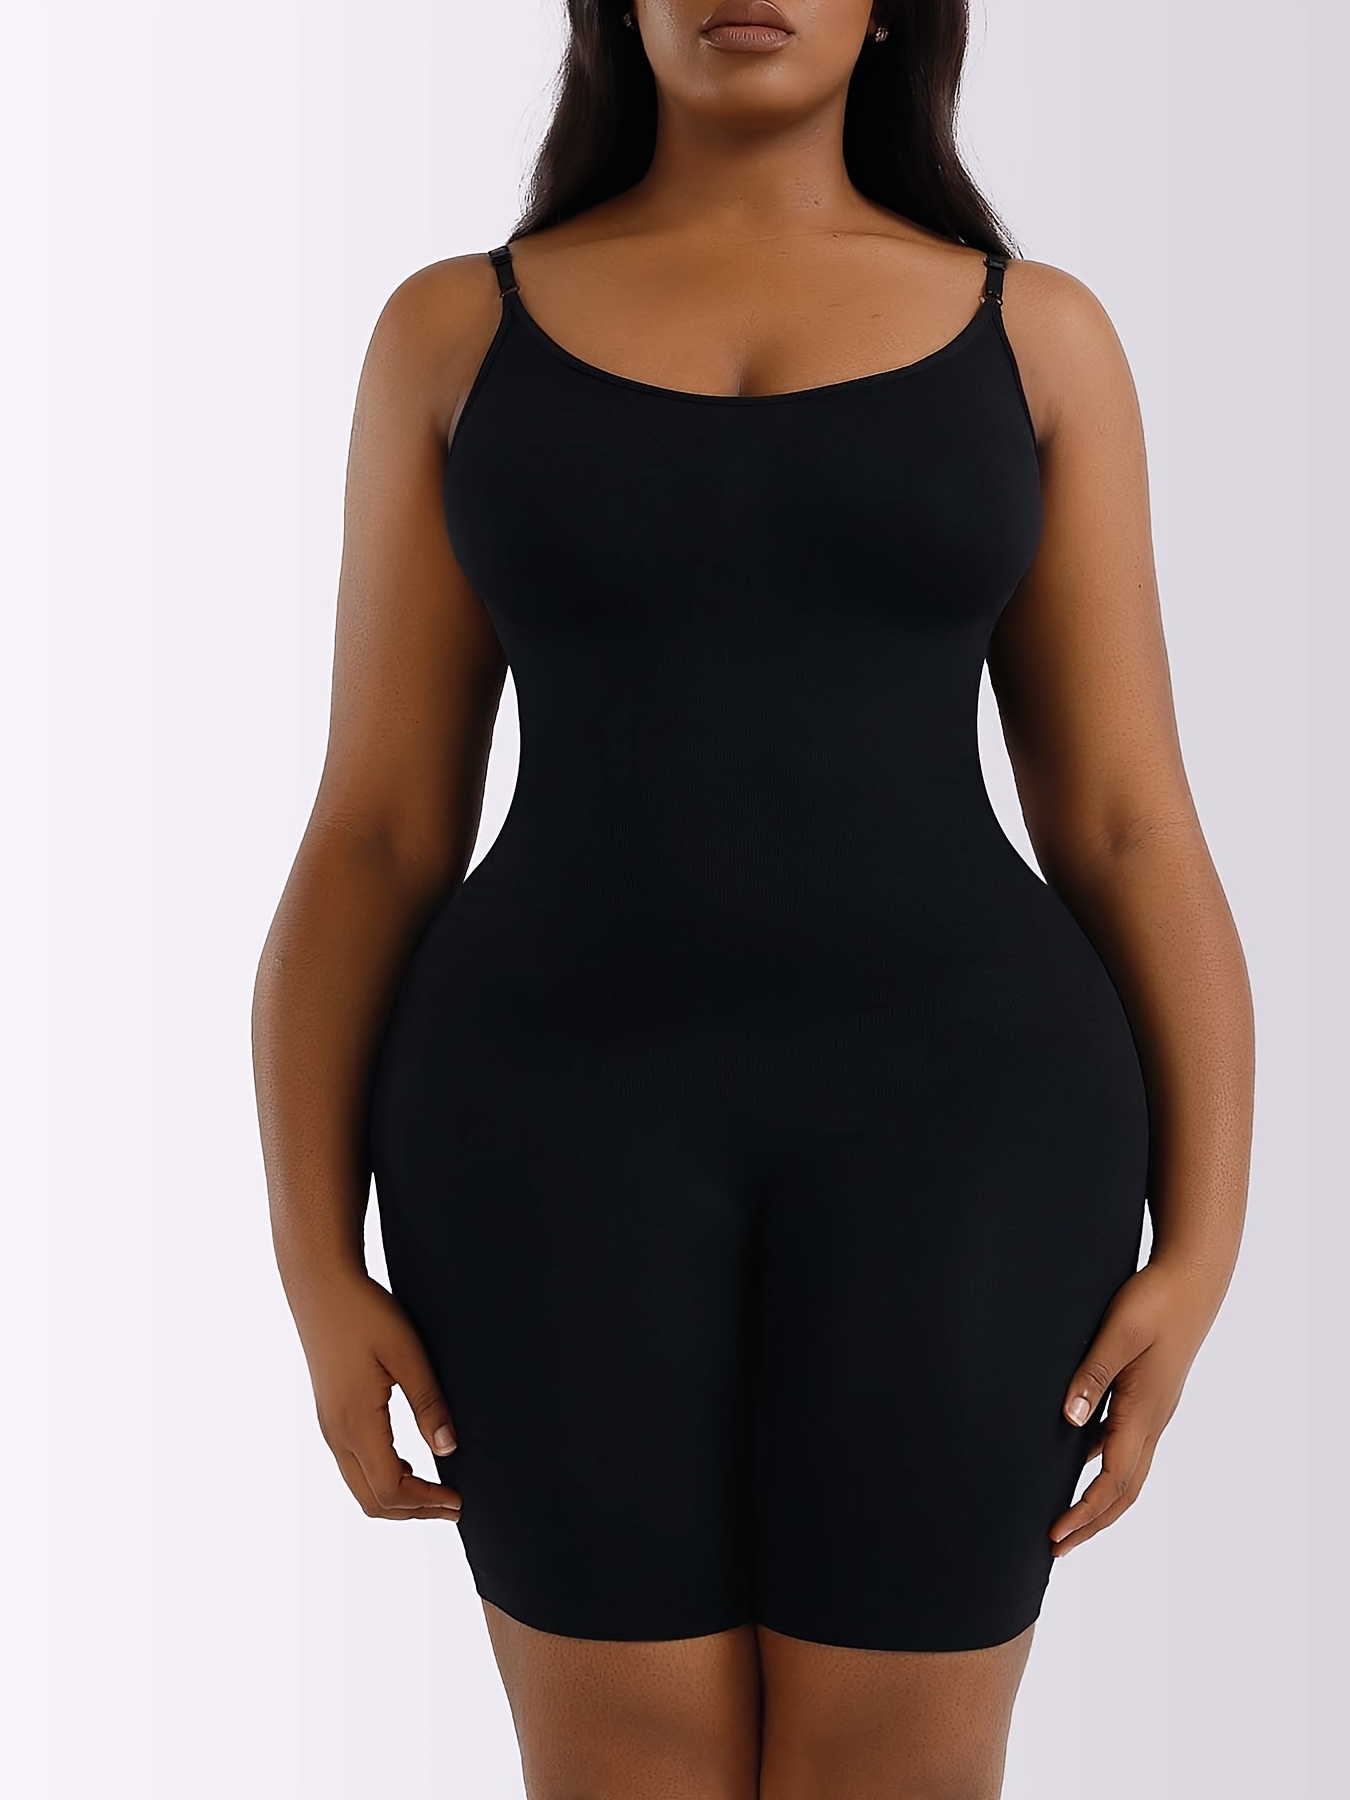 Enwejyy Womens Shapewear Adjustable Strap Corset Belly Tightening Hip Lift  Bodysuit Jumpsuits Plus Size 